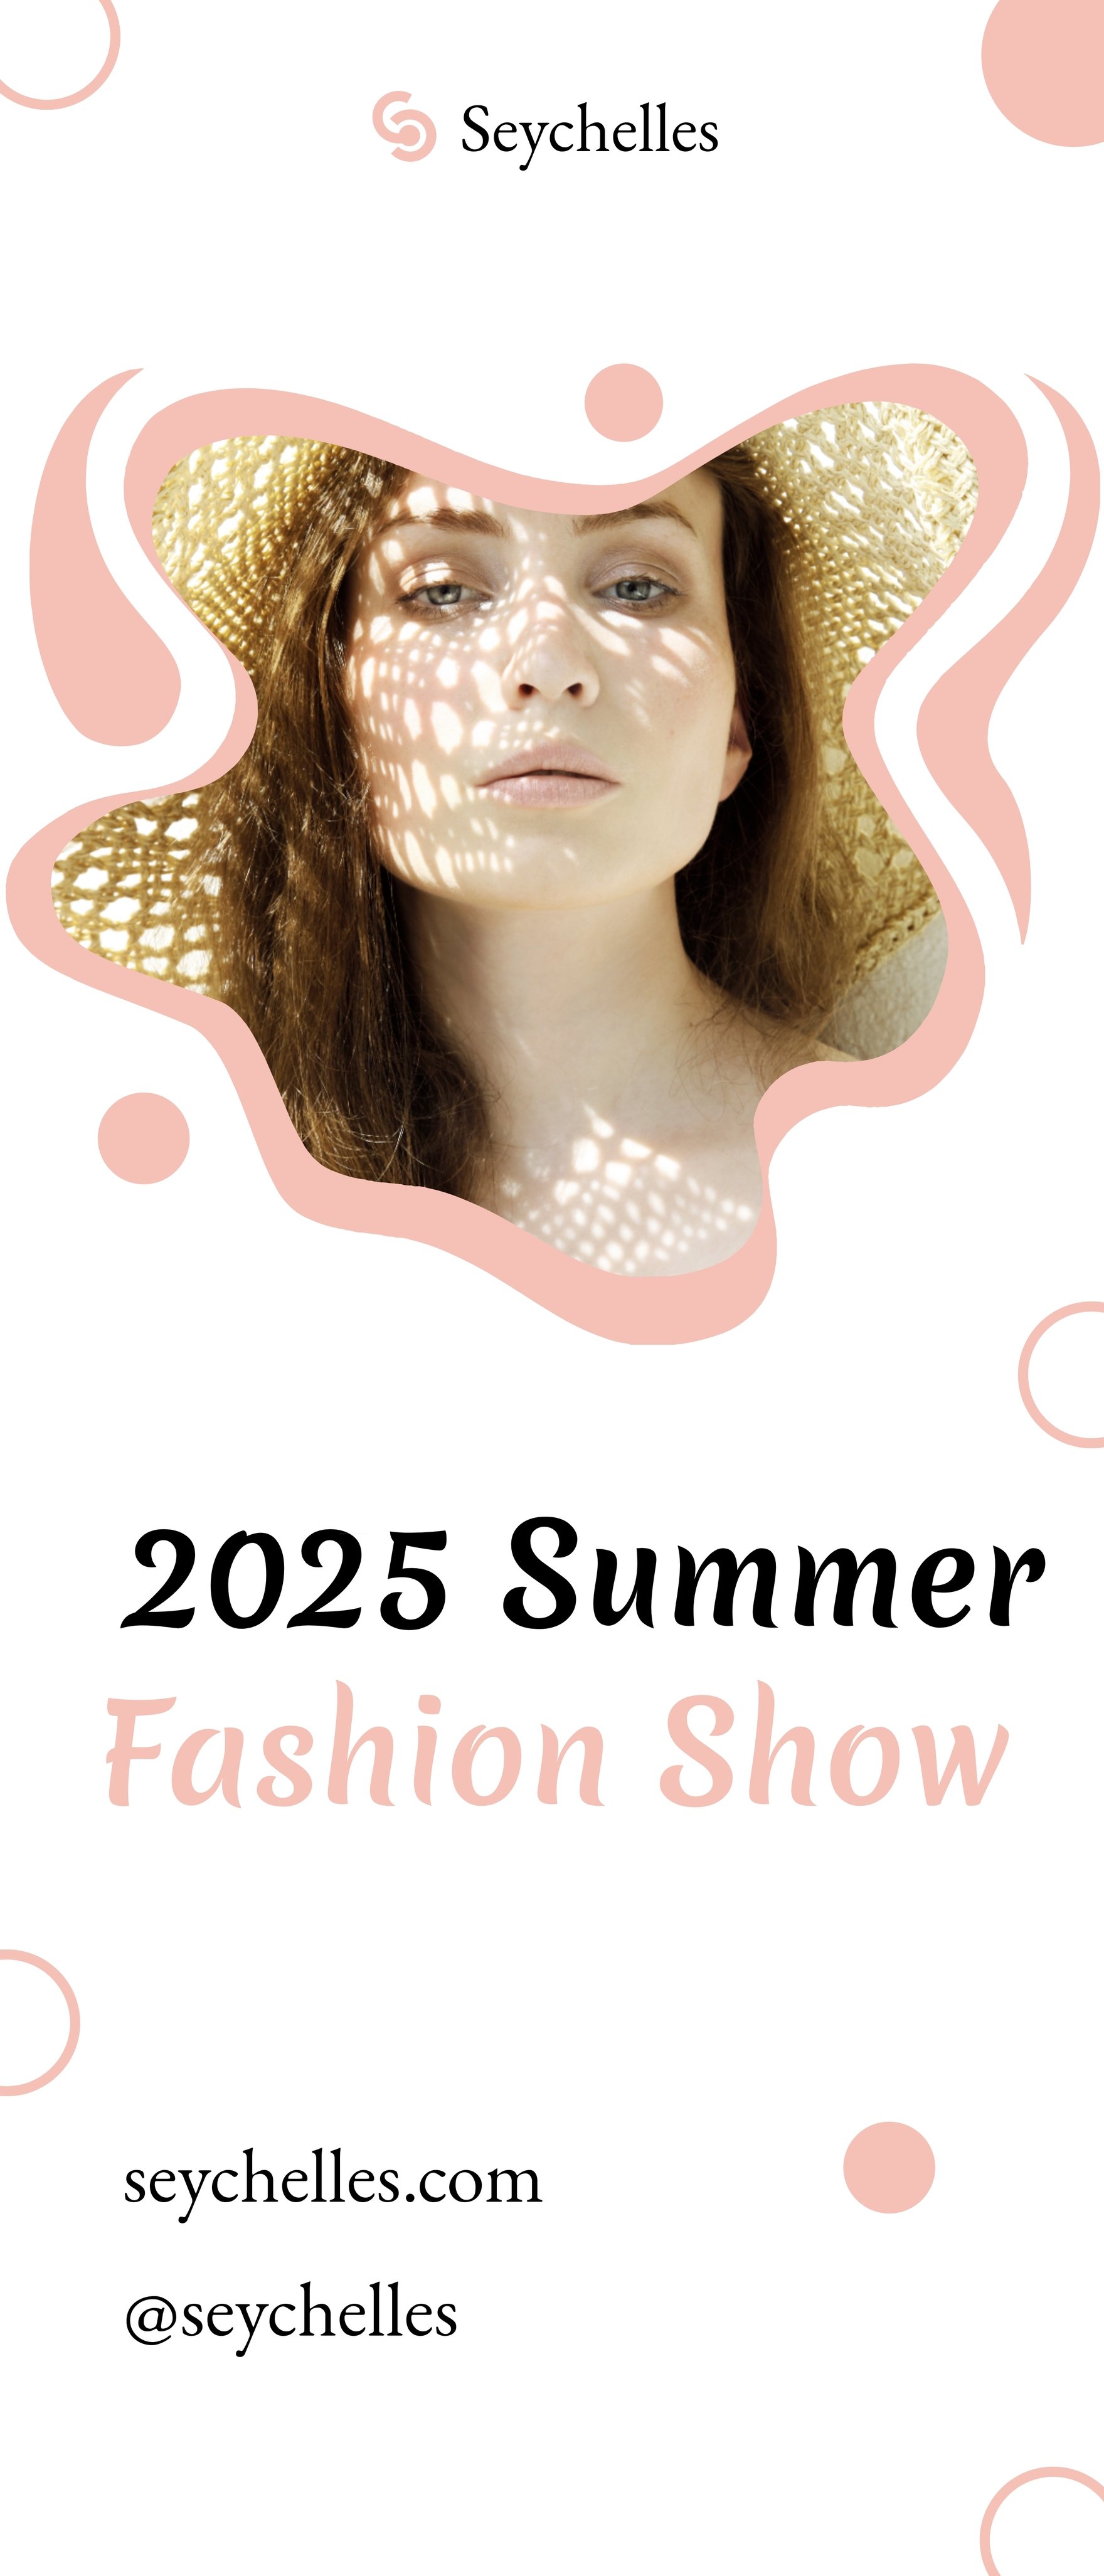 Fashion Show Roll-Up Banner Template in Word, Google Docs, Publisher